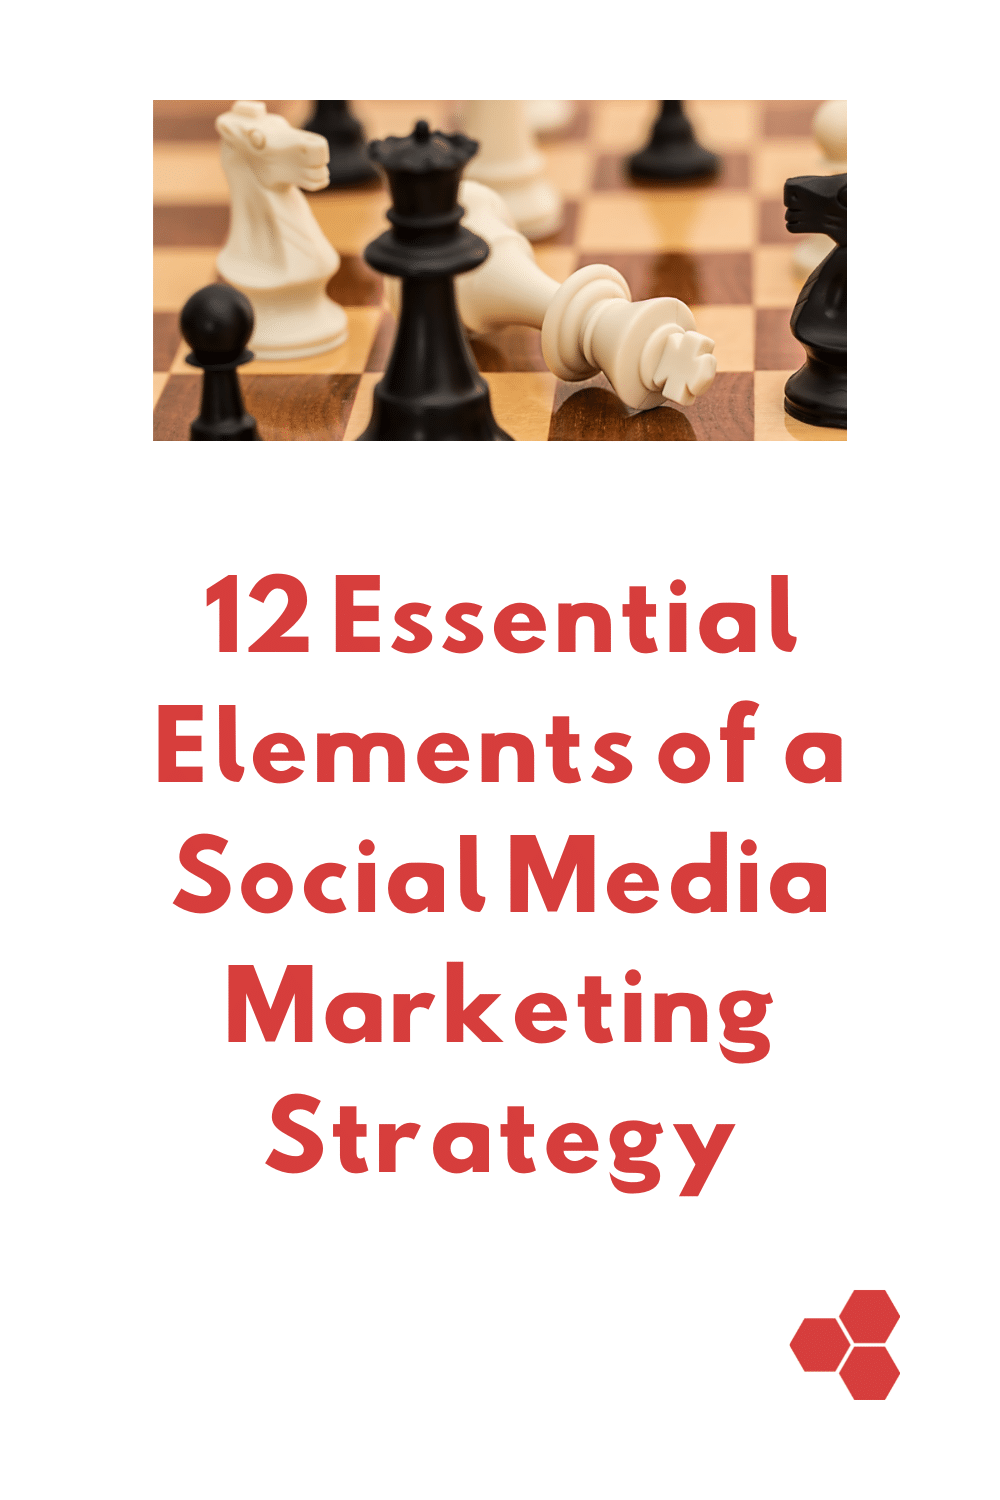 12 Essential Elements of a Social Media Marketing Strategy